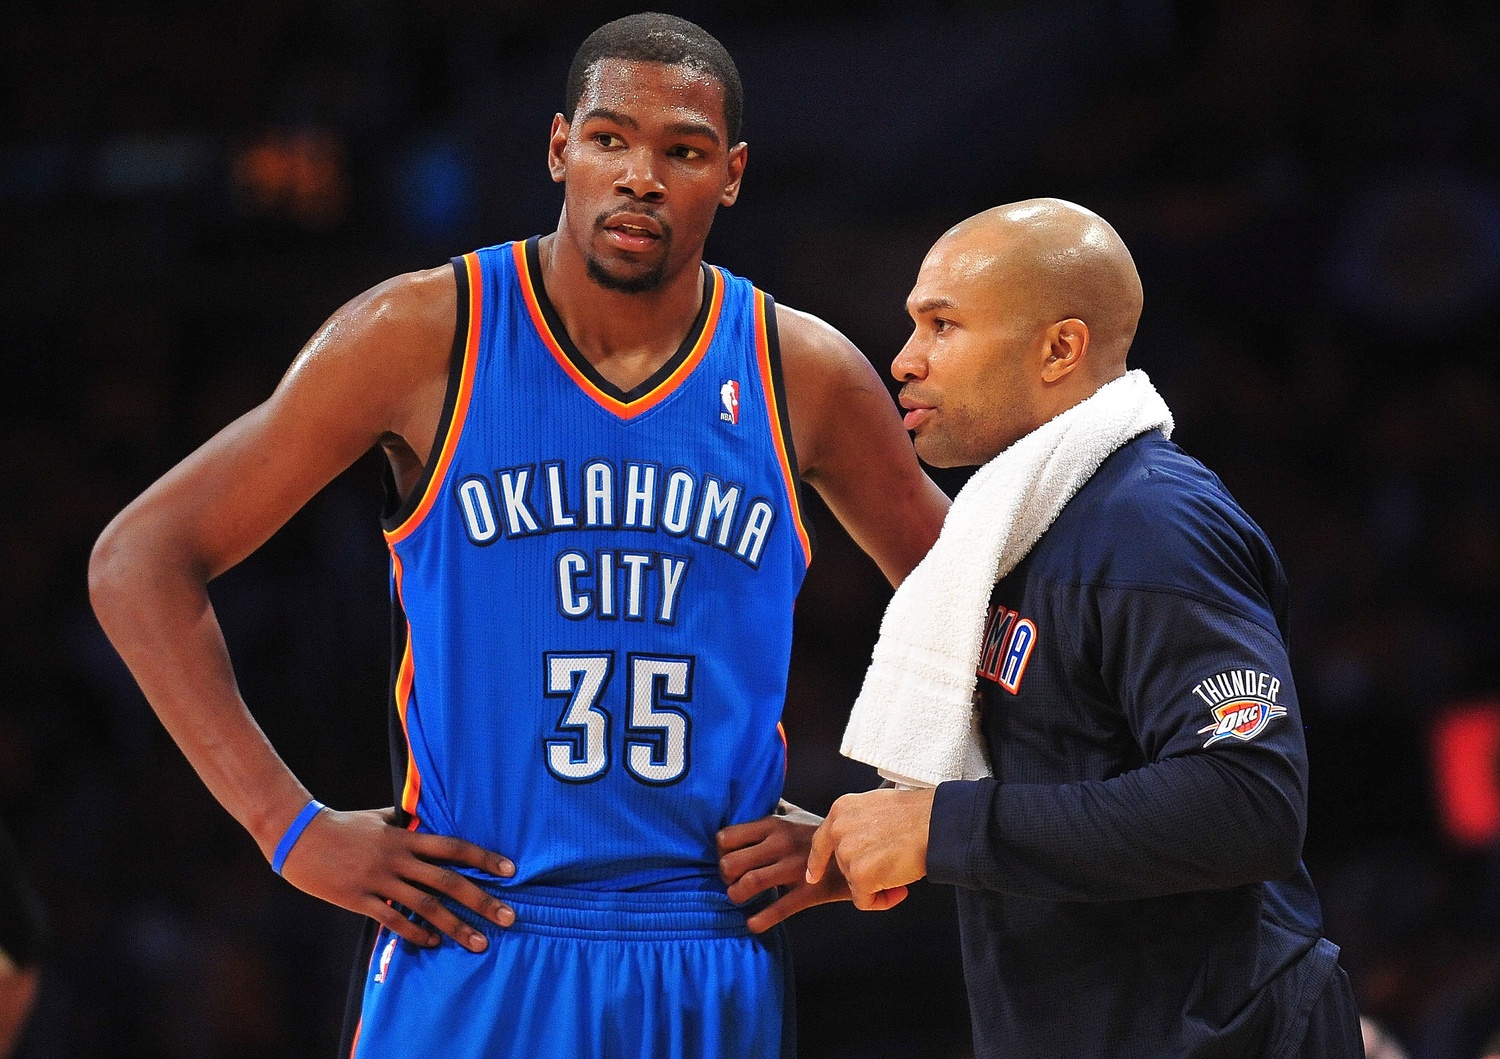 Derek Fisher is already coaching as a player as seen here with Kevin Durant. Photo by Gary A. Vasquez, USA Today Sports Images